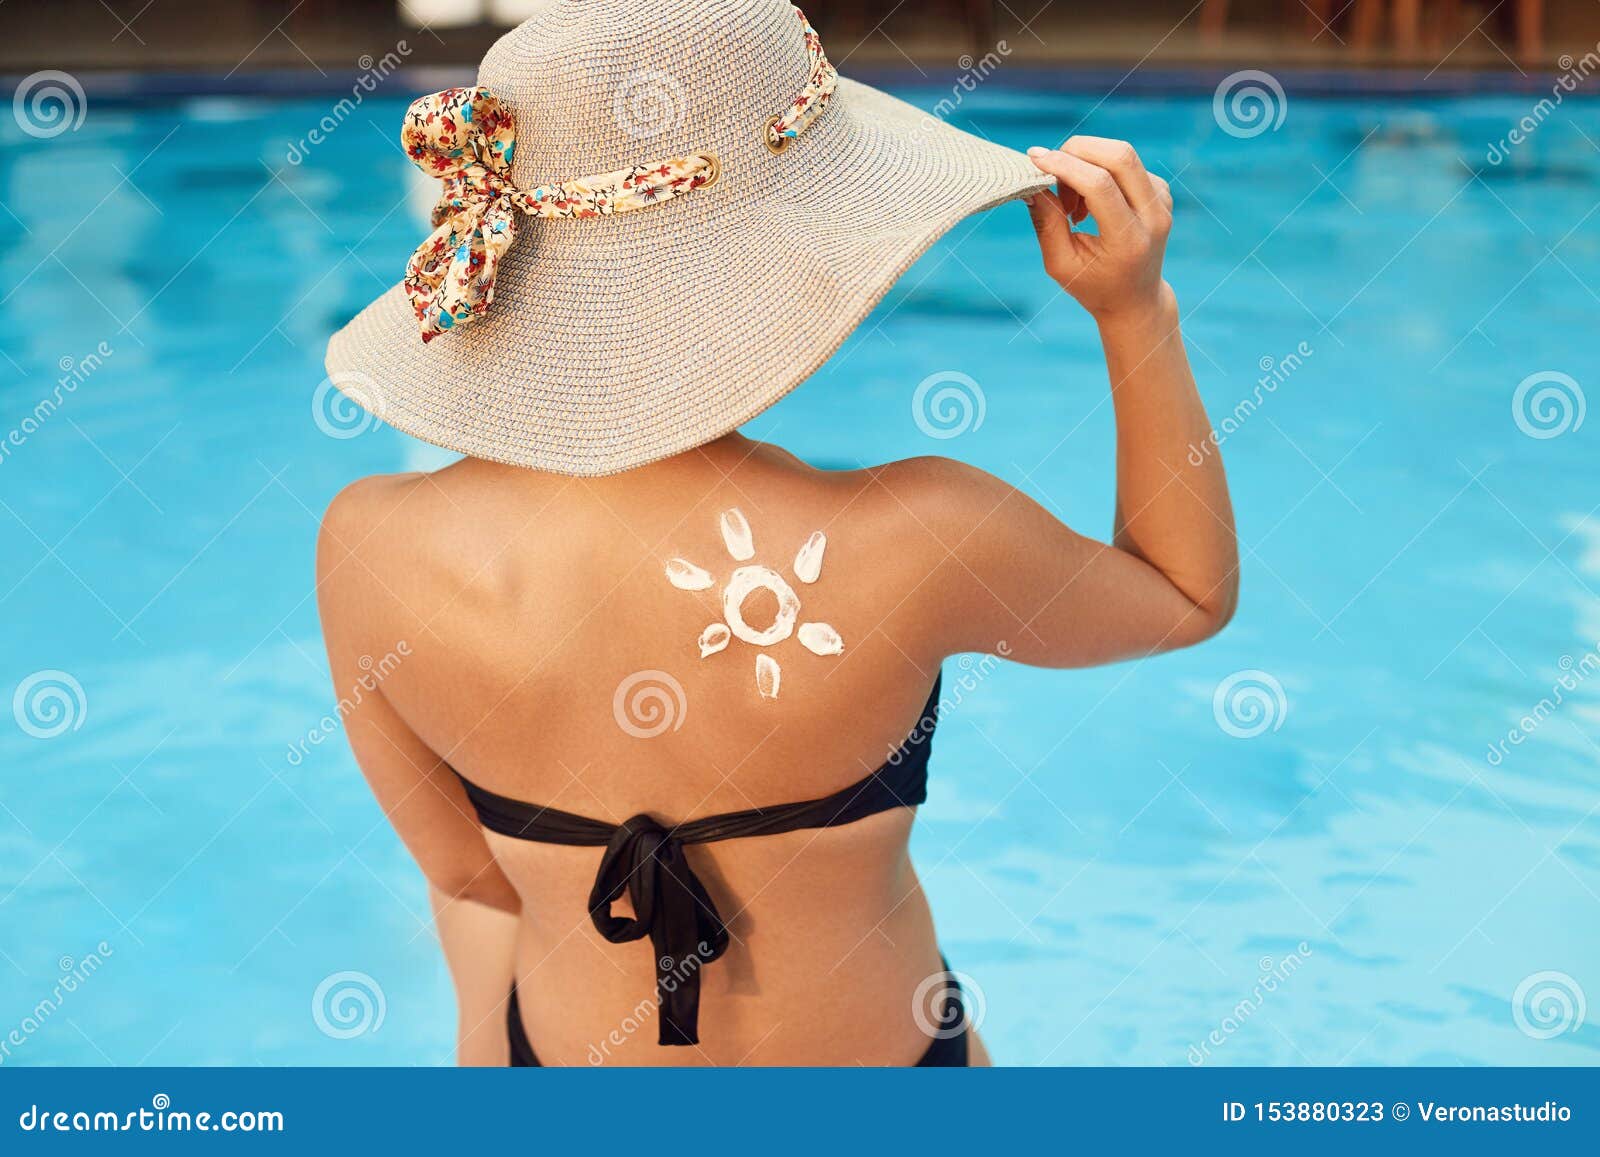 Woman Applying Sunscreen Creme On Tanned Shoulder Skincare Body Sun Protection Suncream Stock